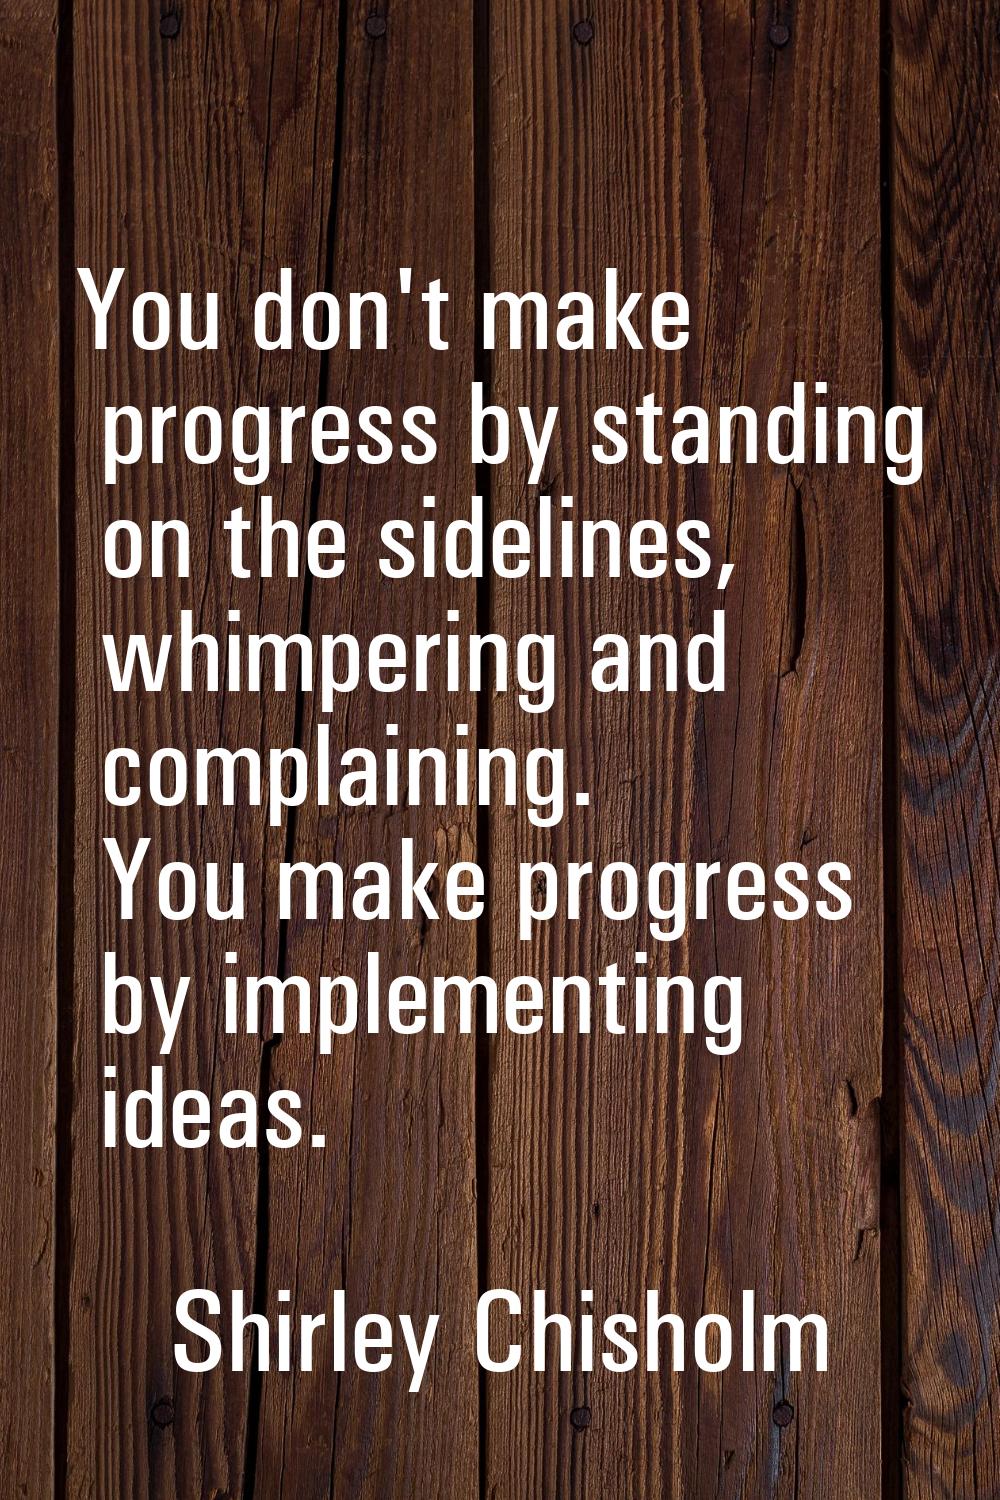 You don't make progress by standing on the sidelines, whimpering and complaining. You make progress